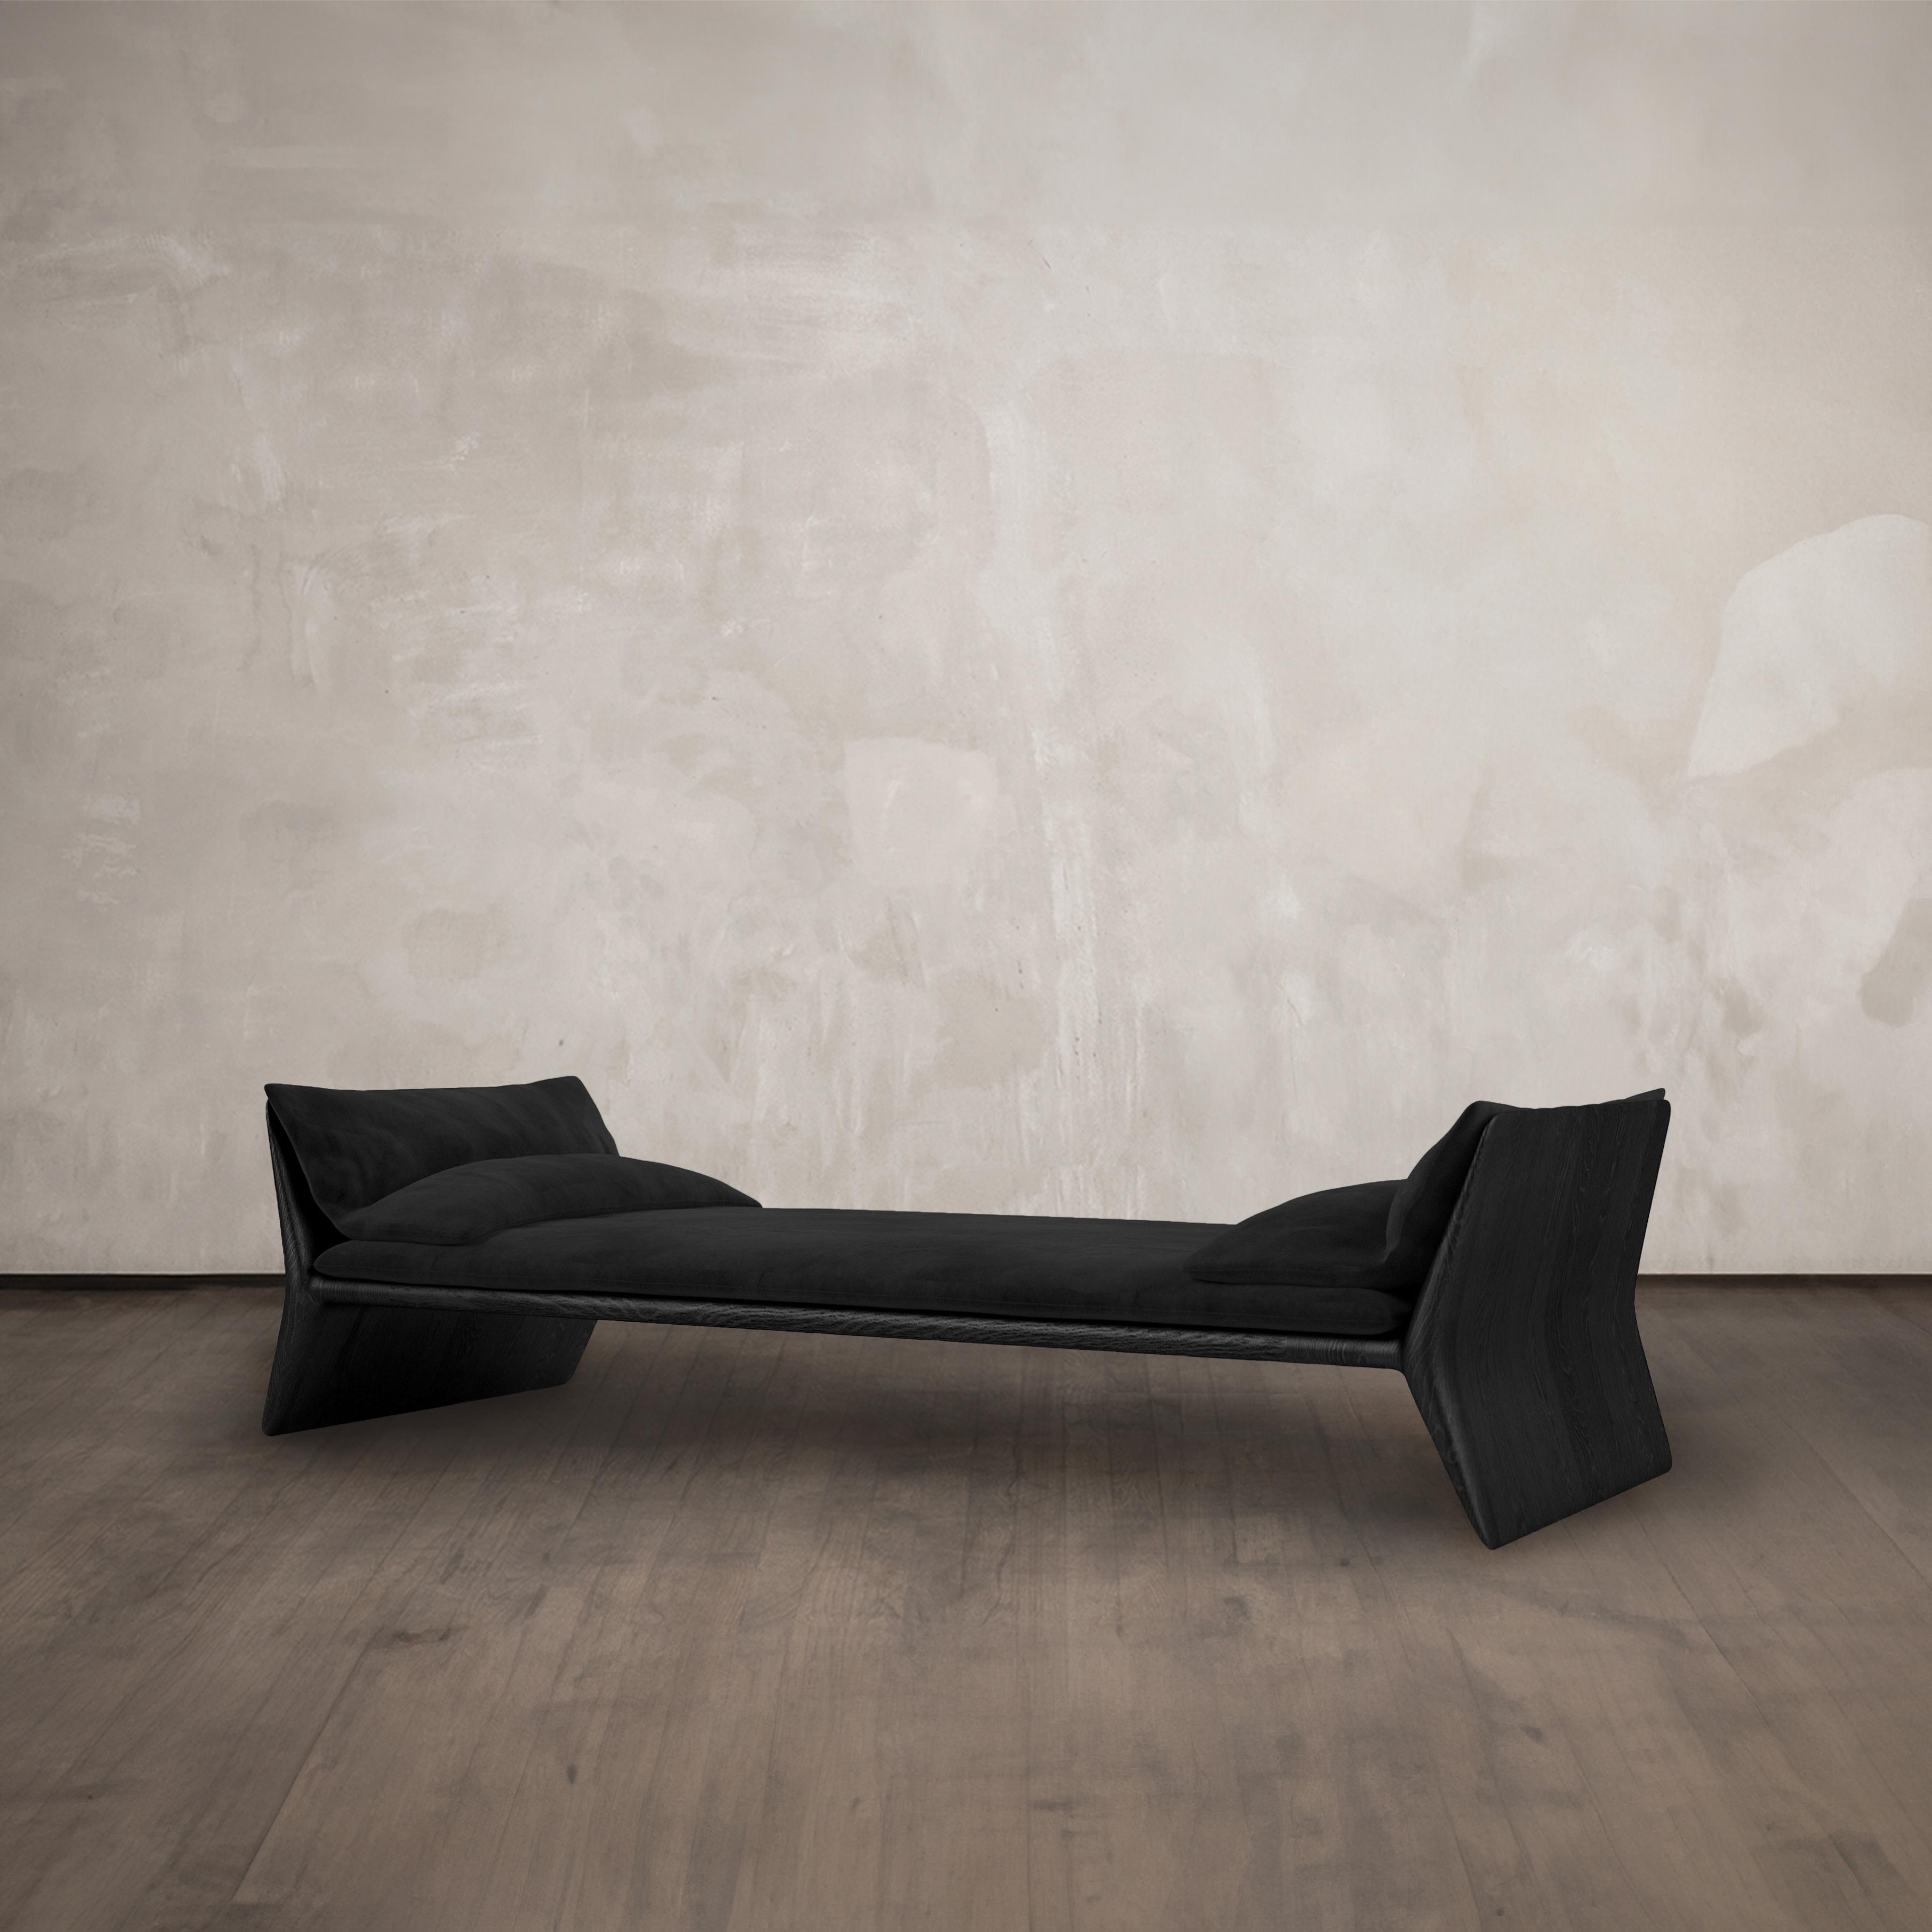 Pieter Maes Ateliers Courbet Palindrome Daybed Bench Rutger Graas Bench Daybed